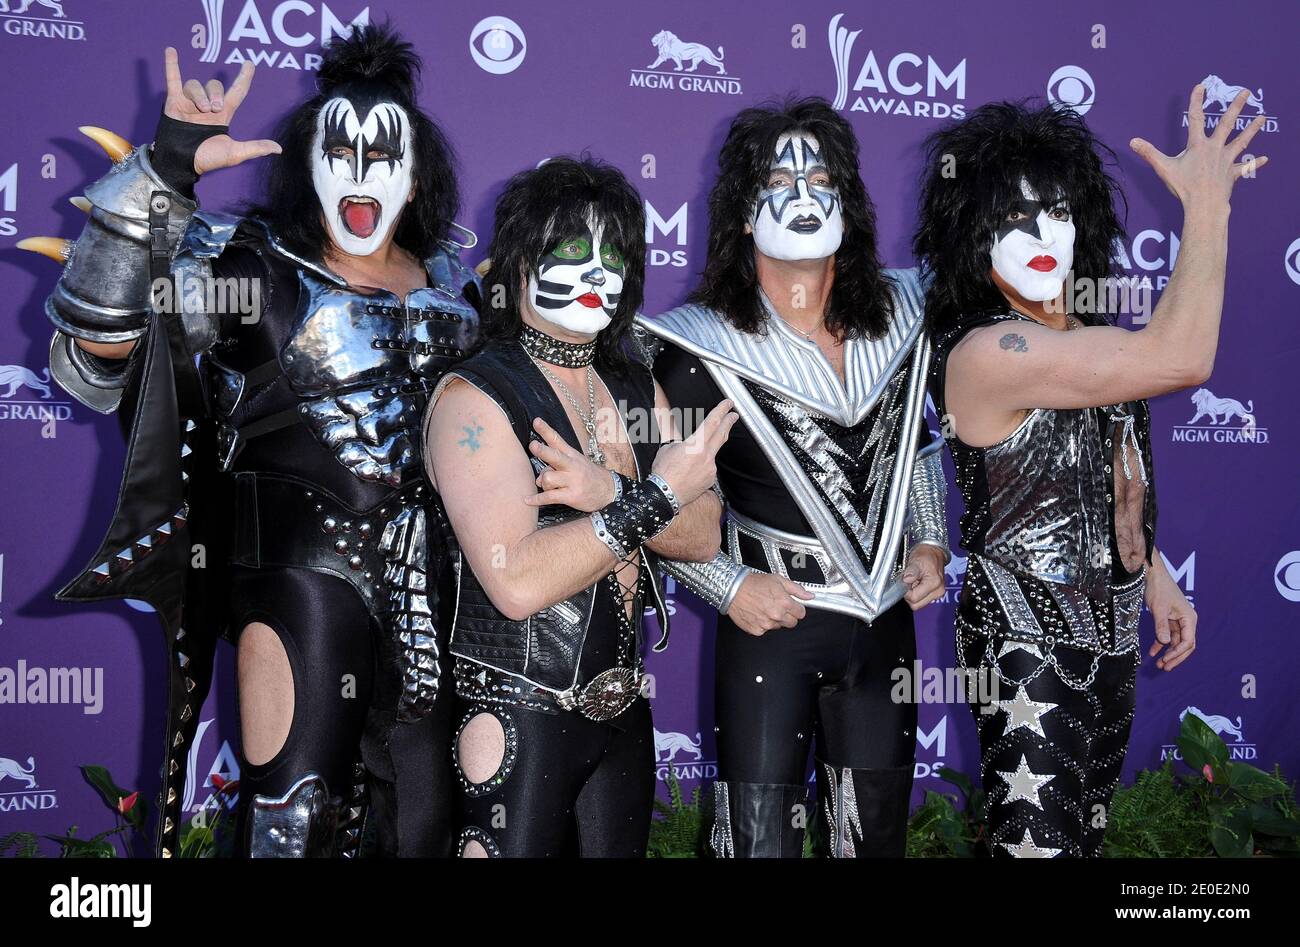 Gene Simmons, Eric Singer, Tommy Thayer and Paul Stanley of the rock band Kiss arrive at the 47th Annual Academy Of Country Music Awards held at the MGM Grand Garden Arena in Las Vegas, Nevada, USA on April 1, 2012. Photo by Lionel Hahn/ABACAPRESS.COM Stock Photo